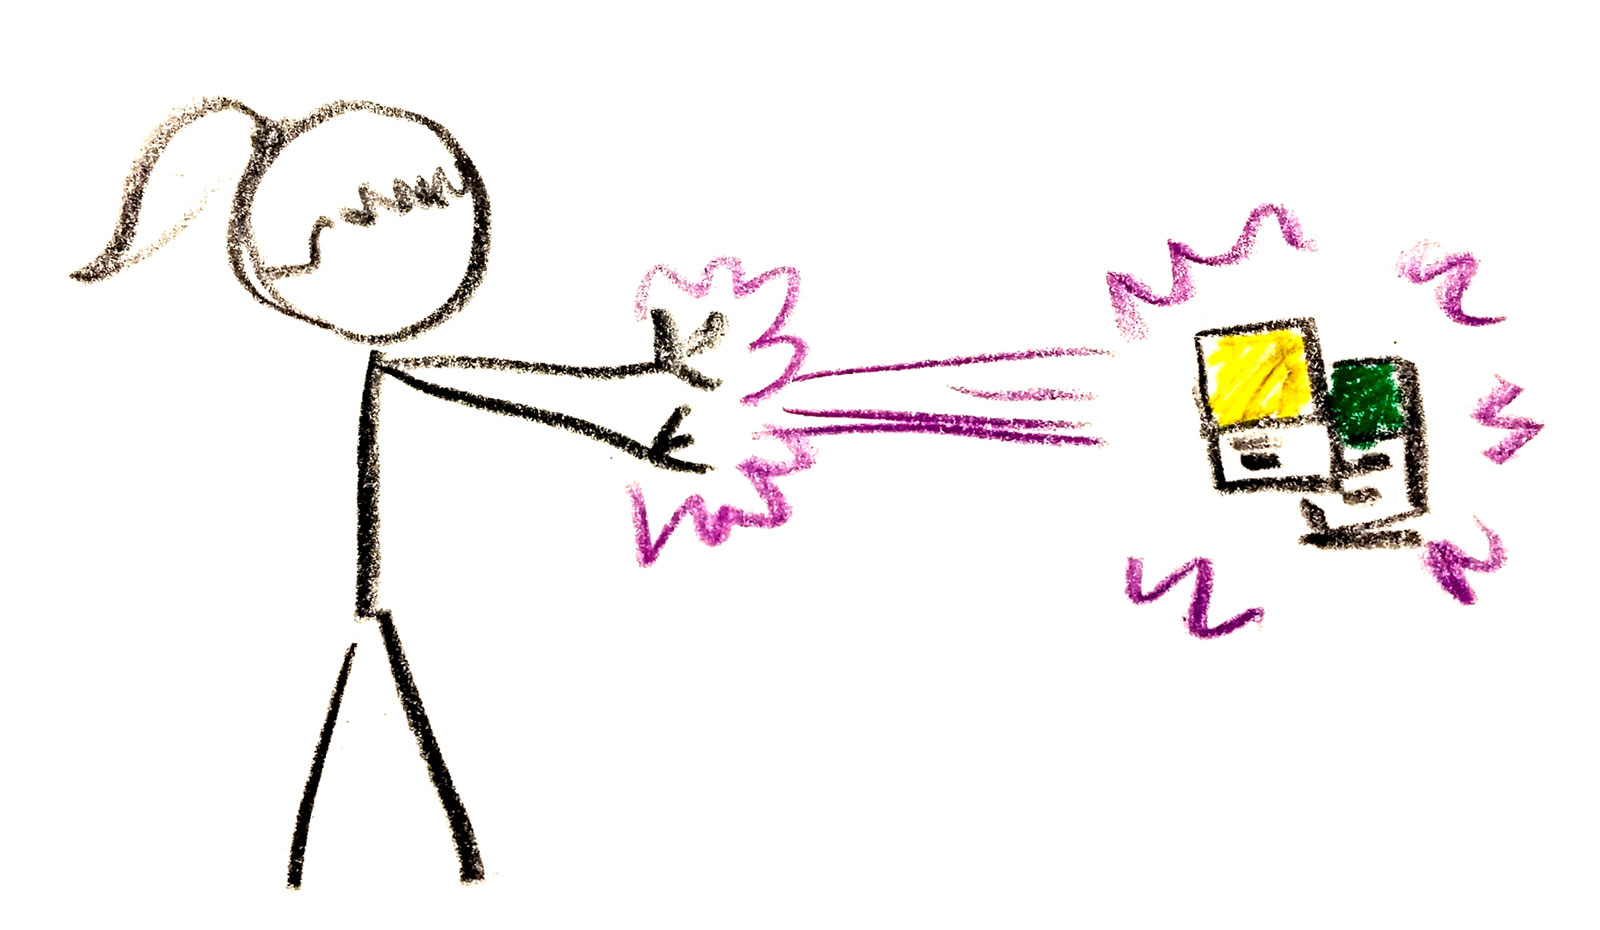 Stick figure zapping two Pantone chips.